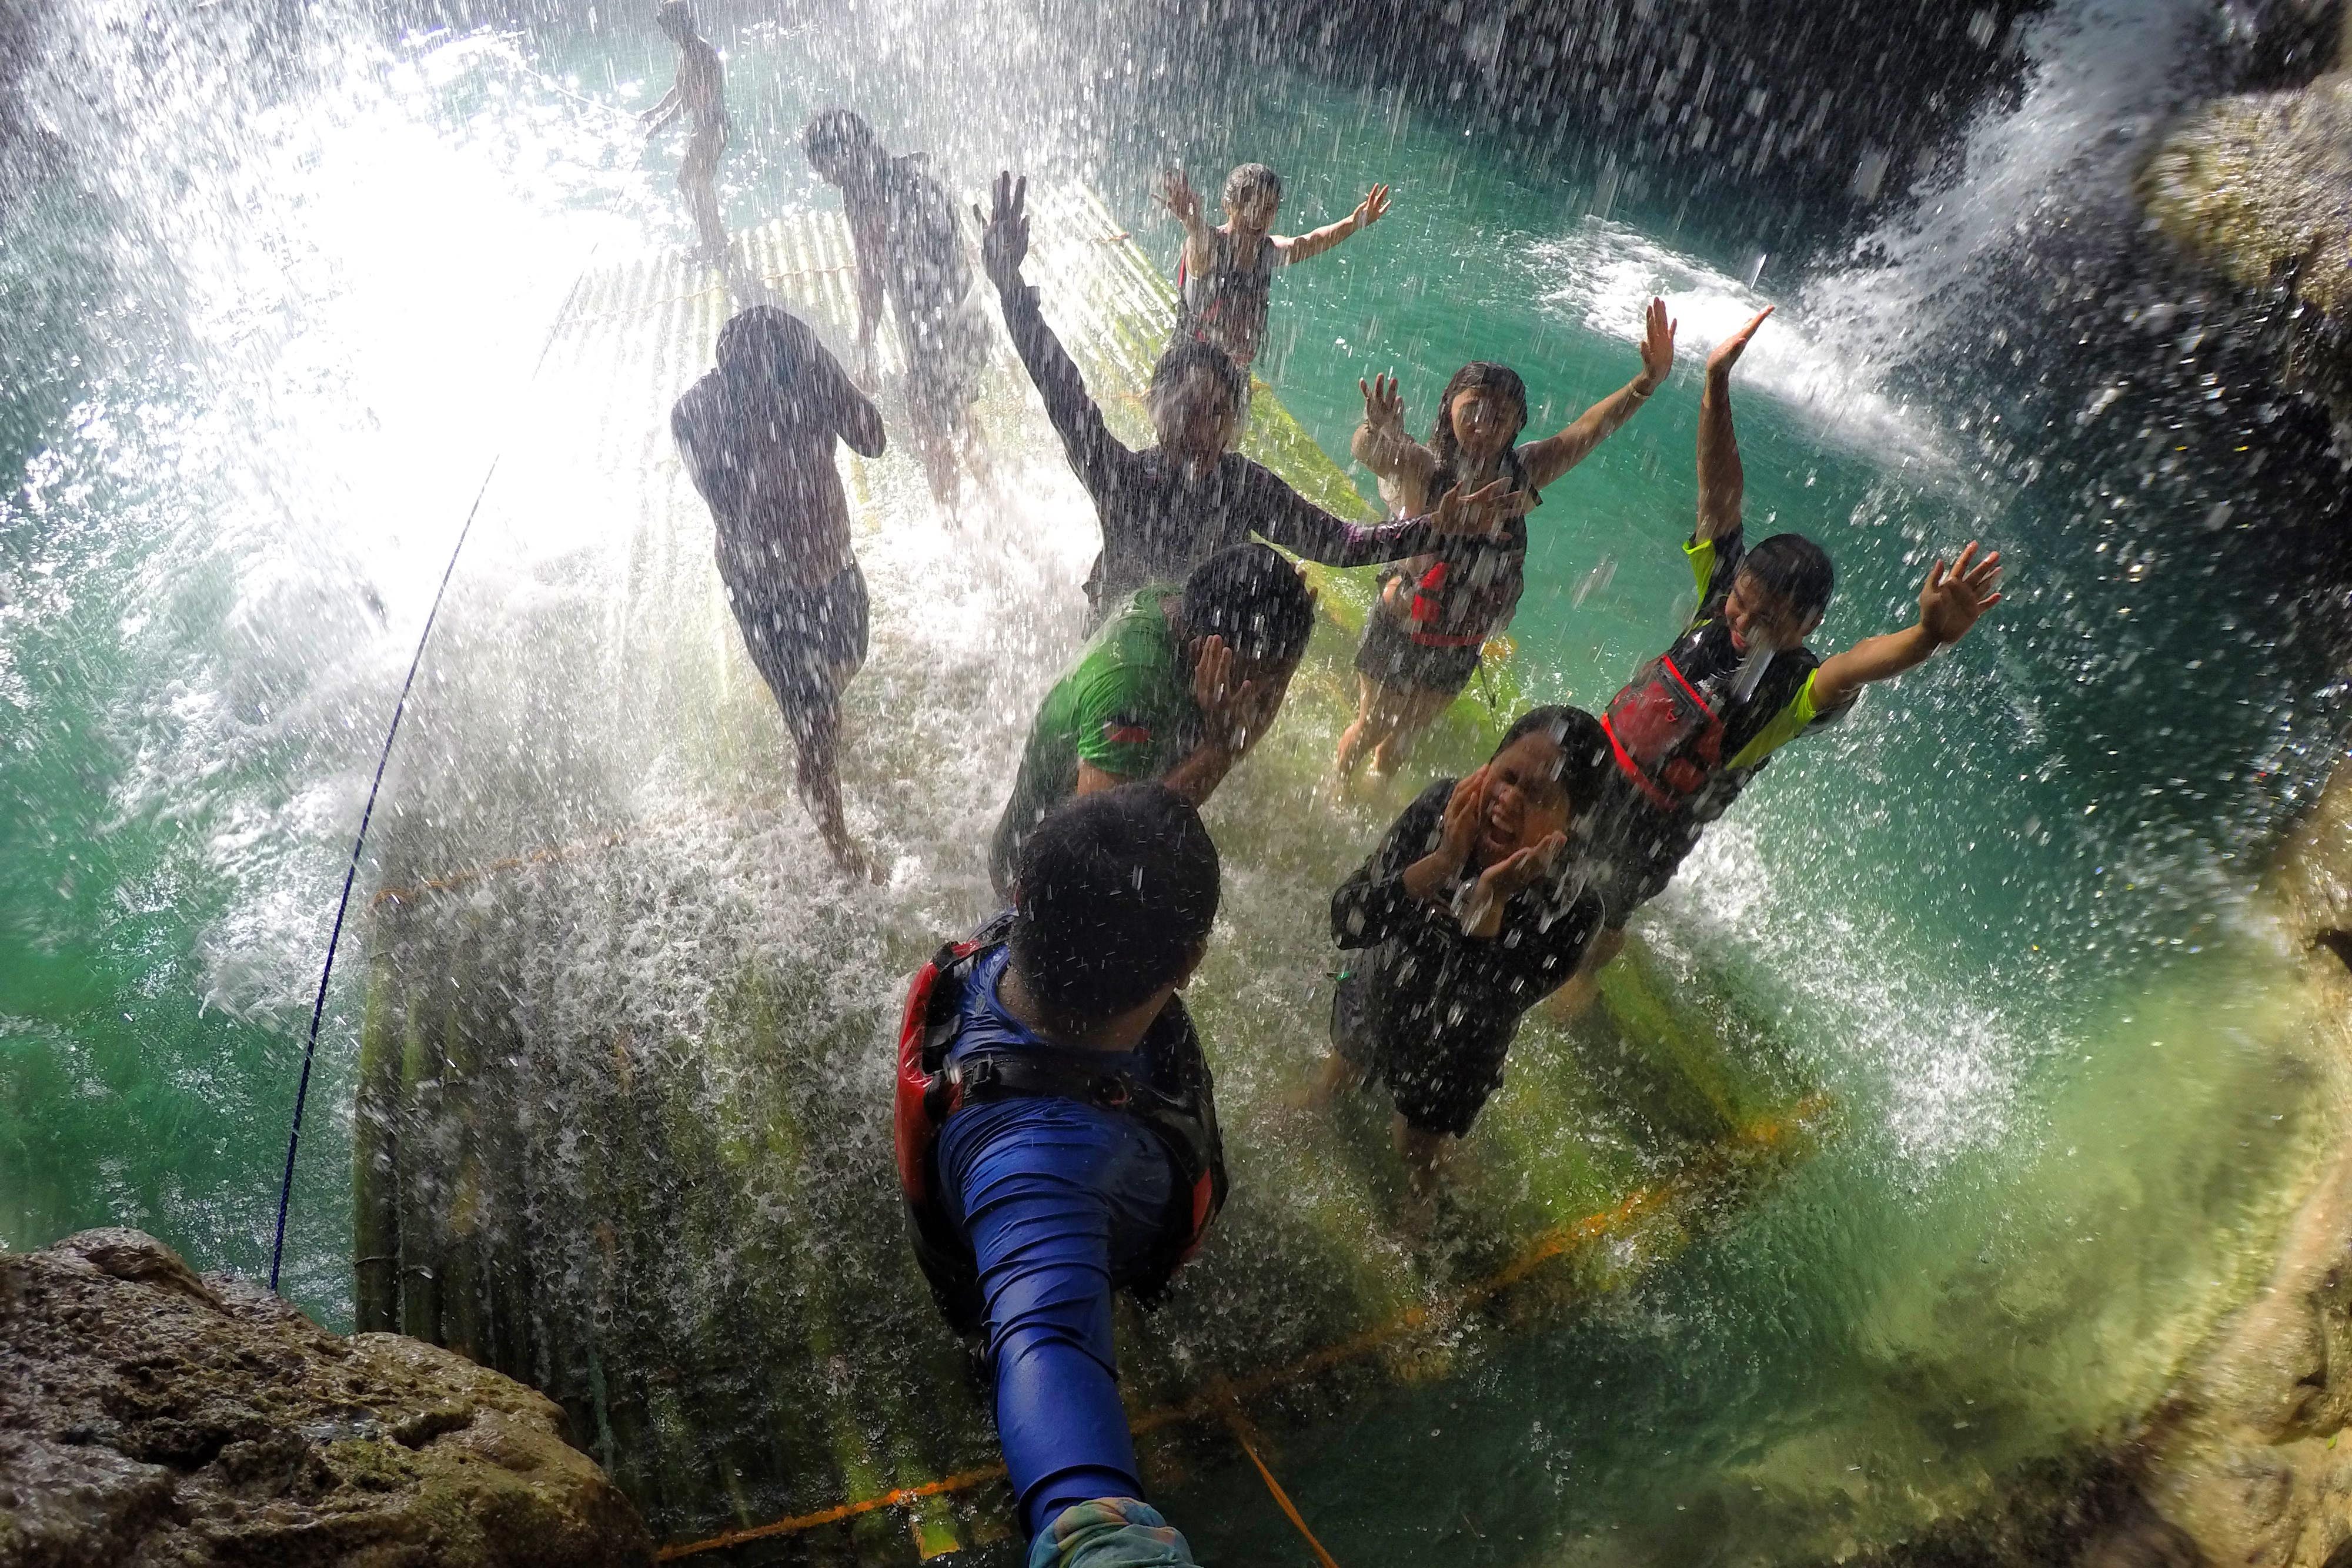 NATURE'S MASSAGE. At the second level of Kawasan, this giant shower can soothe body pains as its cascading water seems like a massage. Photo by Louie Lapat/Rappler  